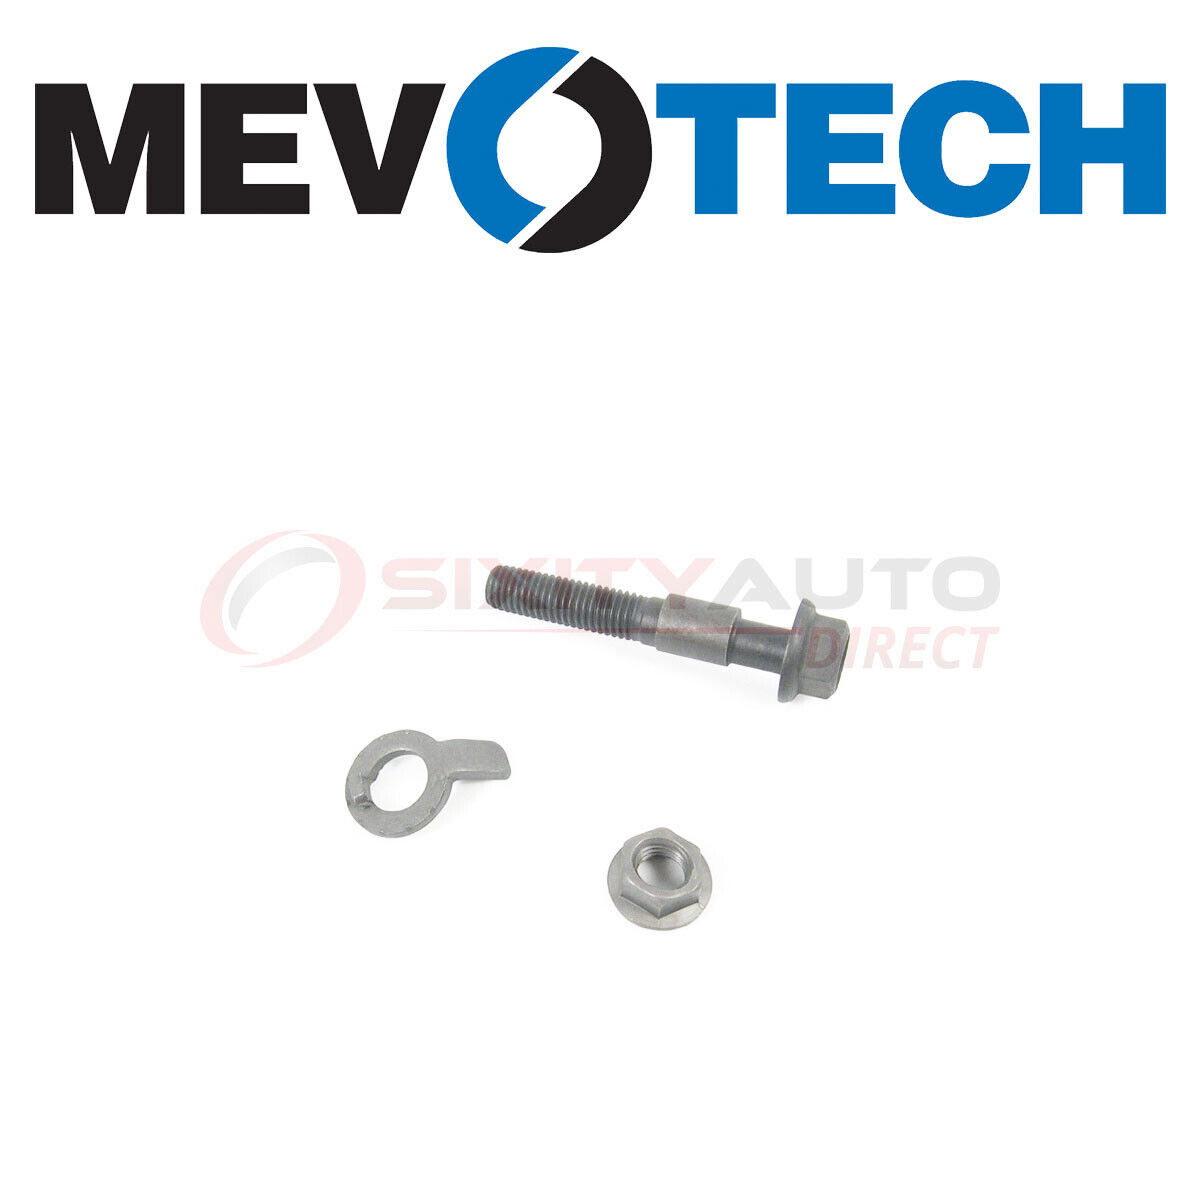 Mevotech Alignment Camber Kit for 1994 Saturn SW2 1.9L L4 - Wheels Tires xh